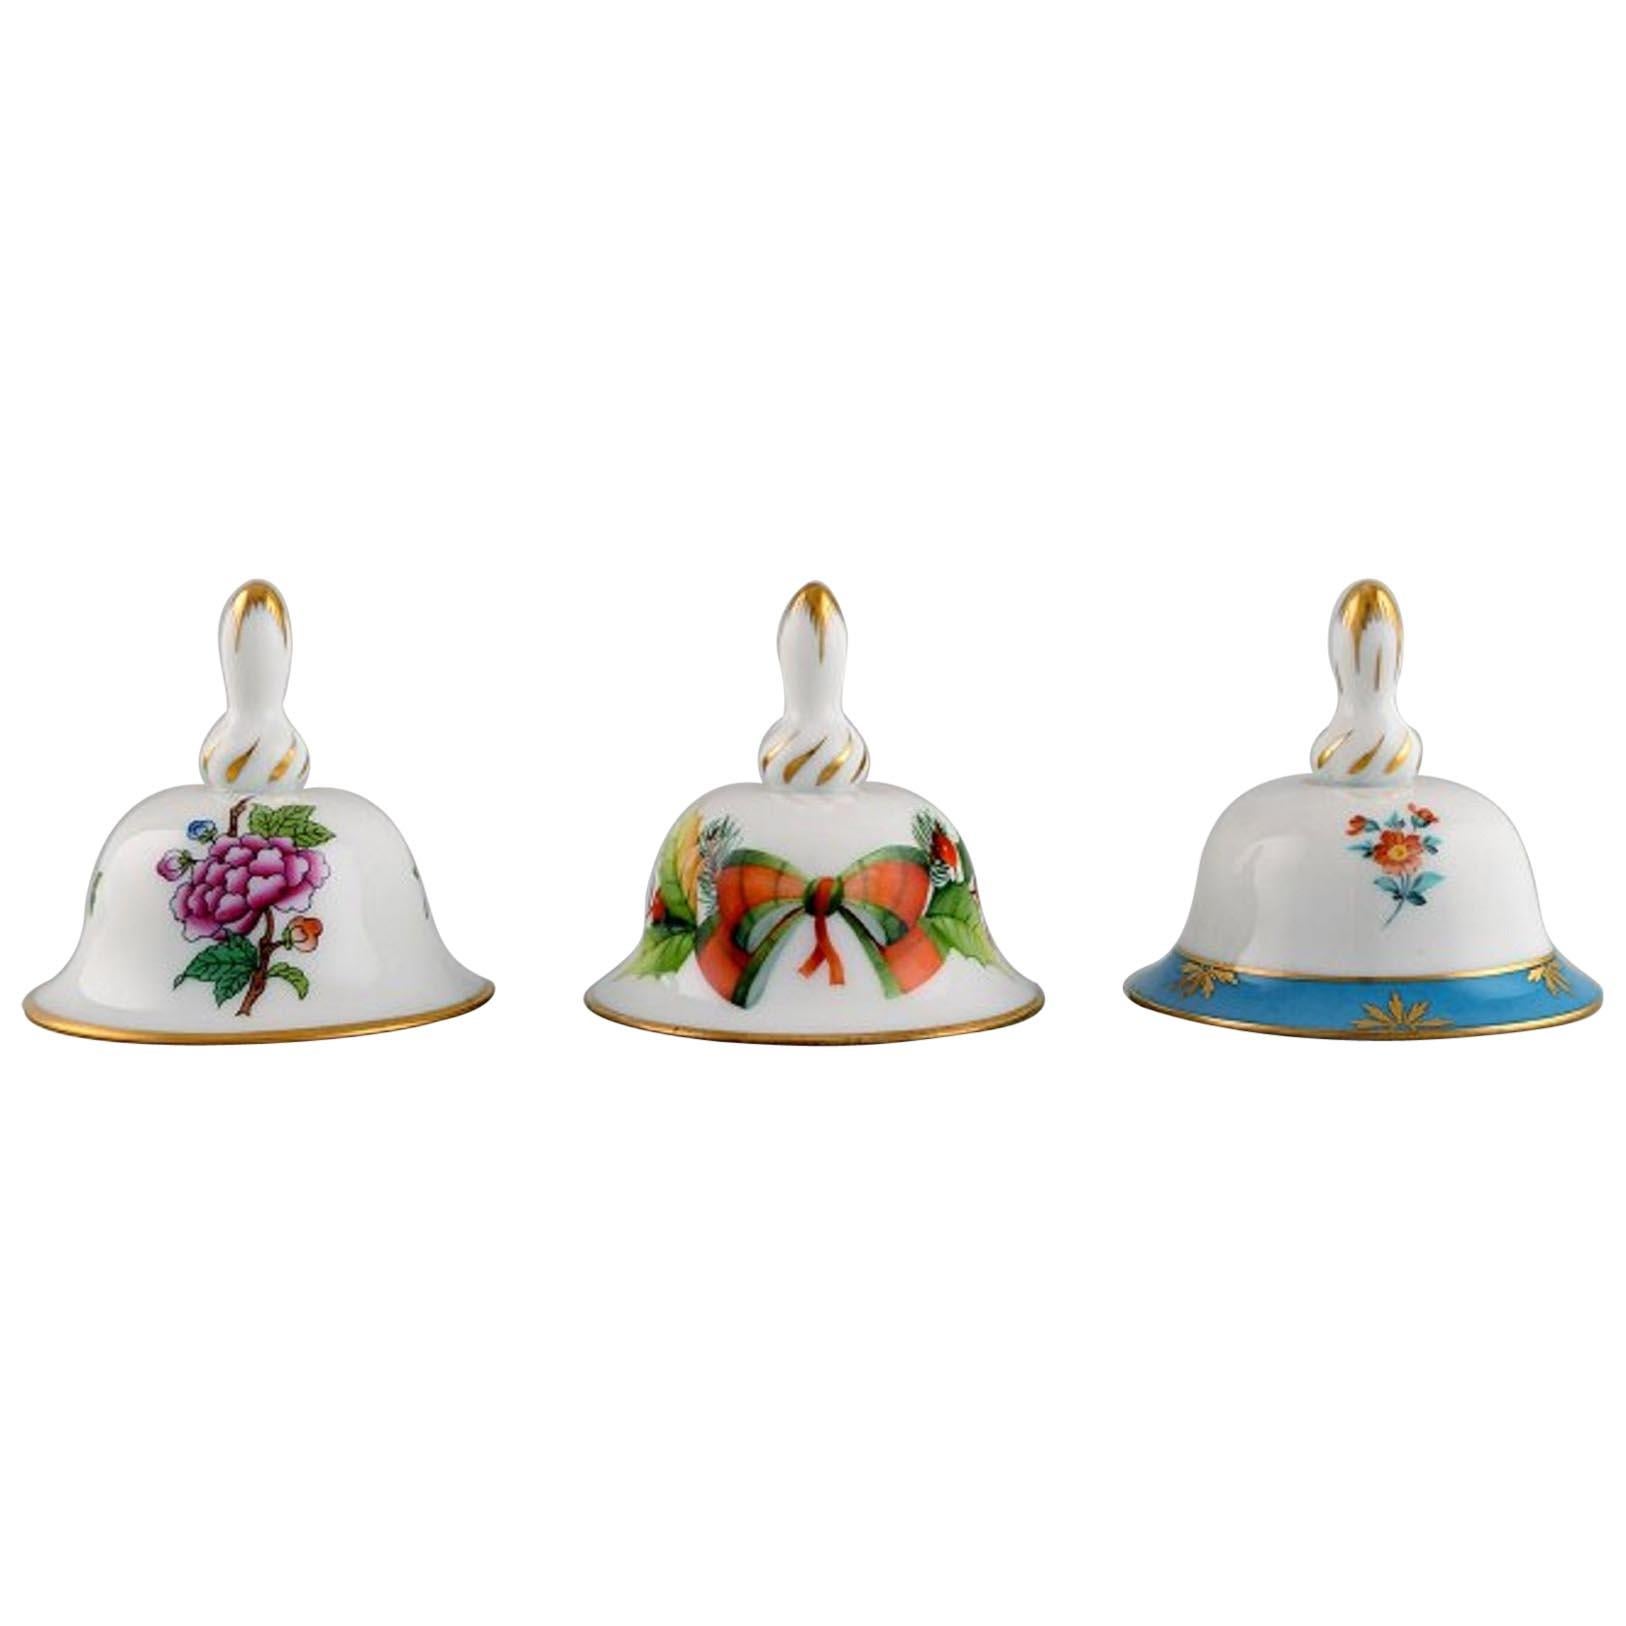 Three Herend Table Bells in Hand-Painted Porcelain with Flowers, 1980's For Sale